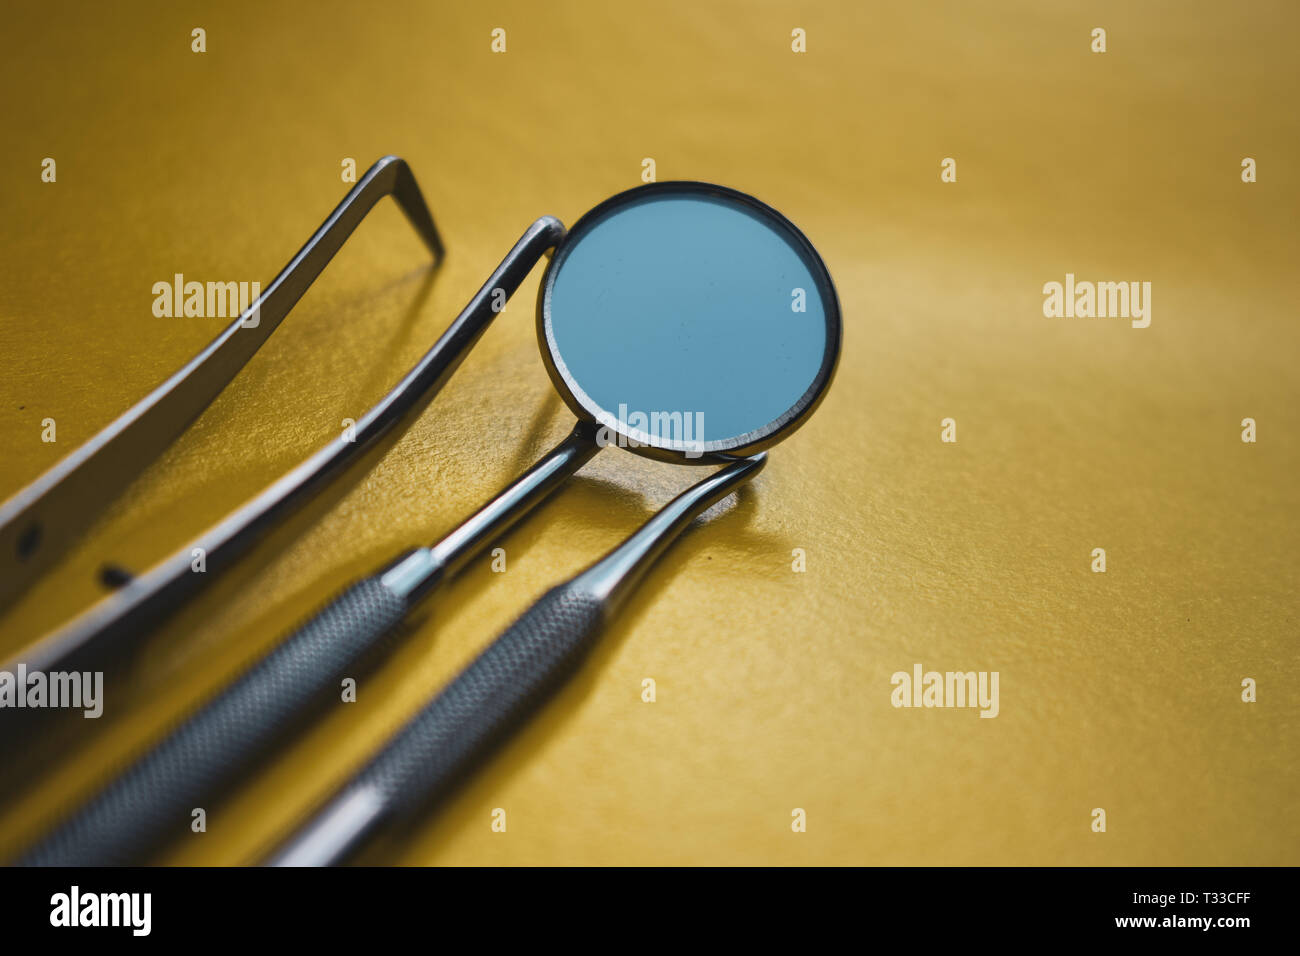 Close-up Dental Instruments on a yellow background. Prevention of oral diseases. Stock Photo